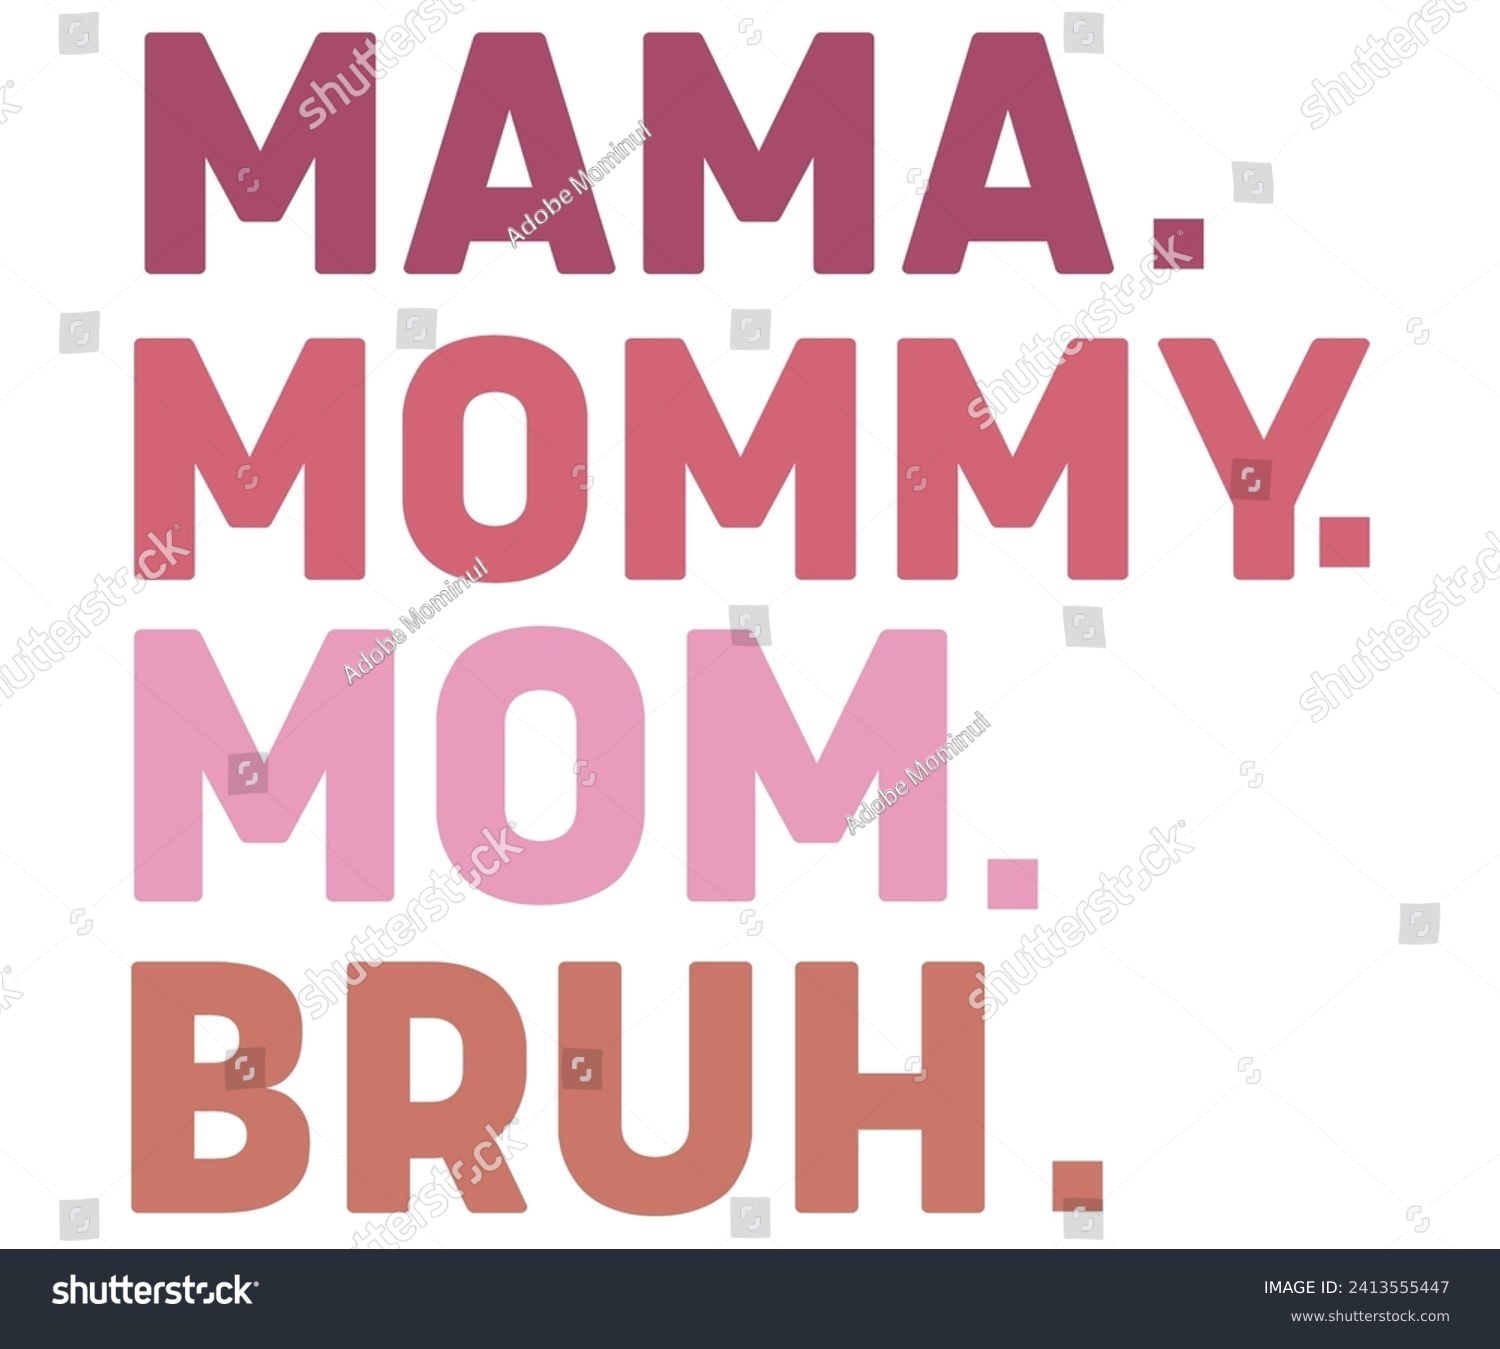 SVG of Mama Mommy Mom Bruh Svg,Mothers Day Svg,Png,Mom Quotes Svg,Funny Mom Svg,Gift For Mom Svg,Mom life Svg,Mama Svg,Mommy T-shirt Design,Svg Cut File,Dog Mom deisn,Retro Groovy,Auntie T-shirt Design, svg